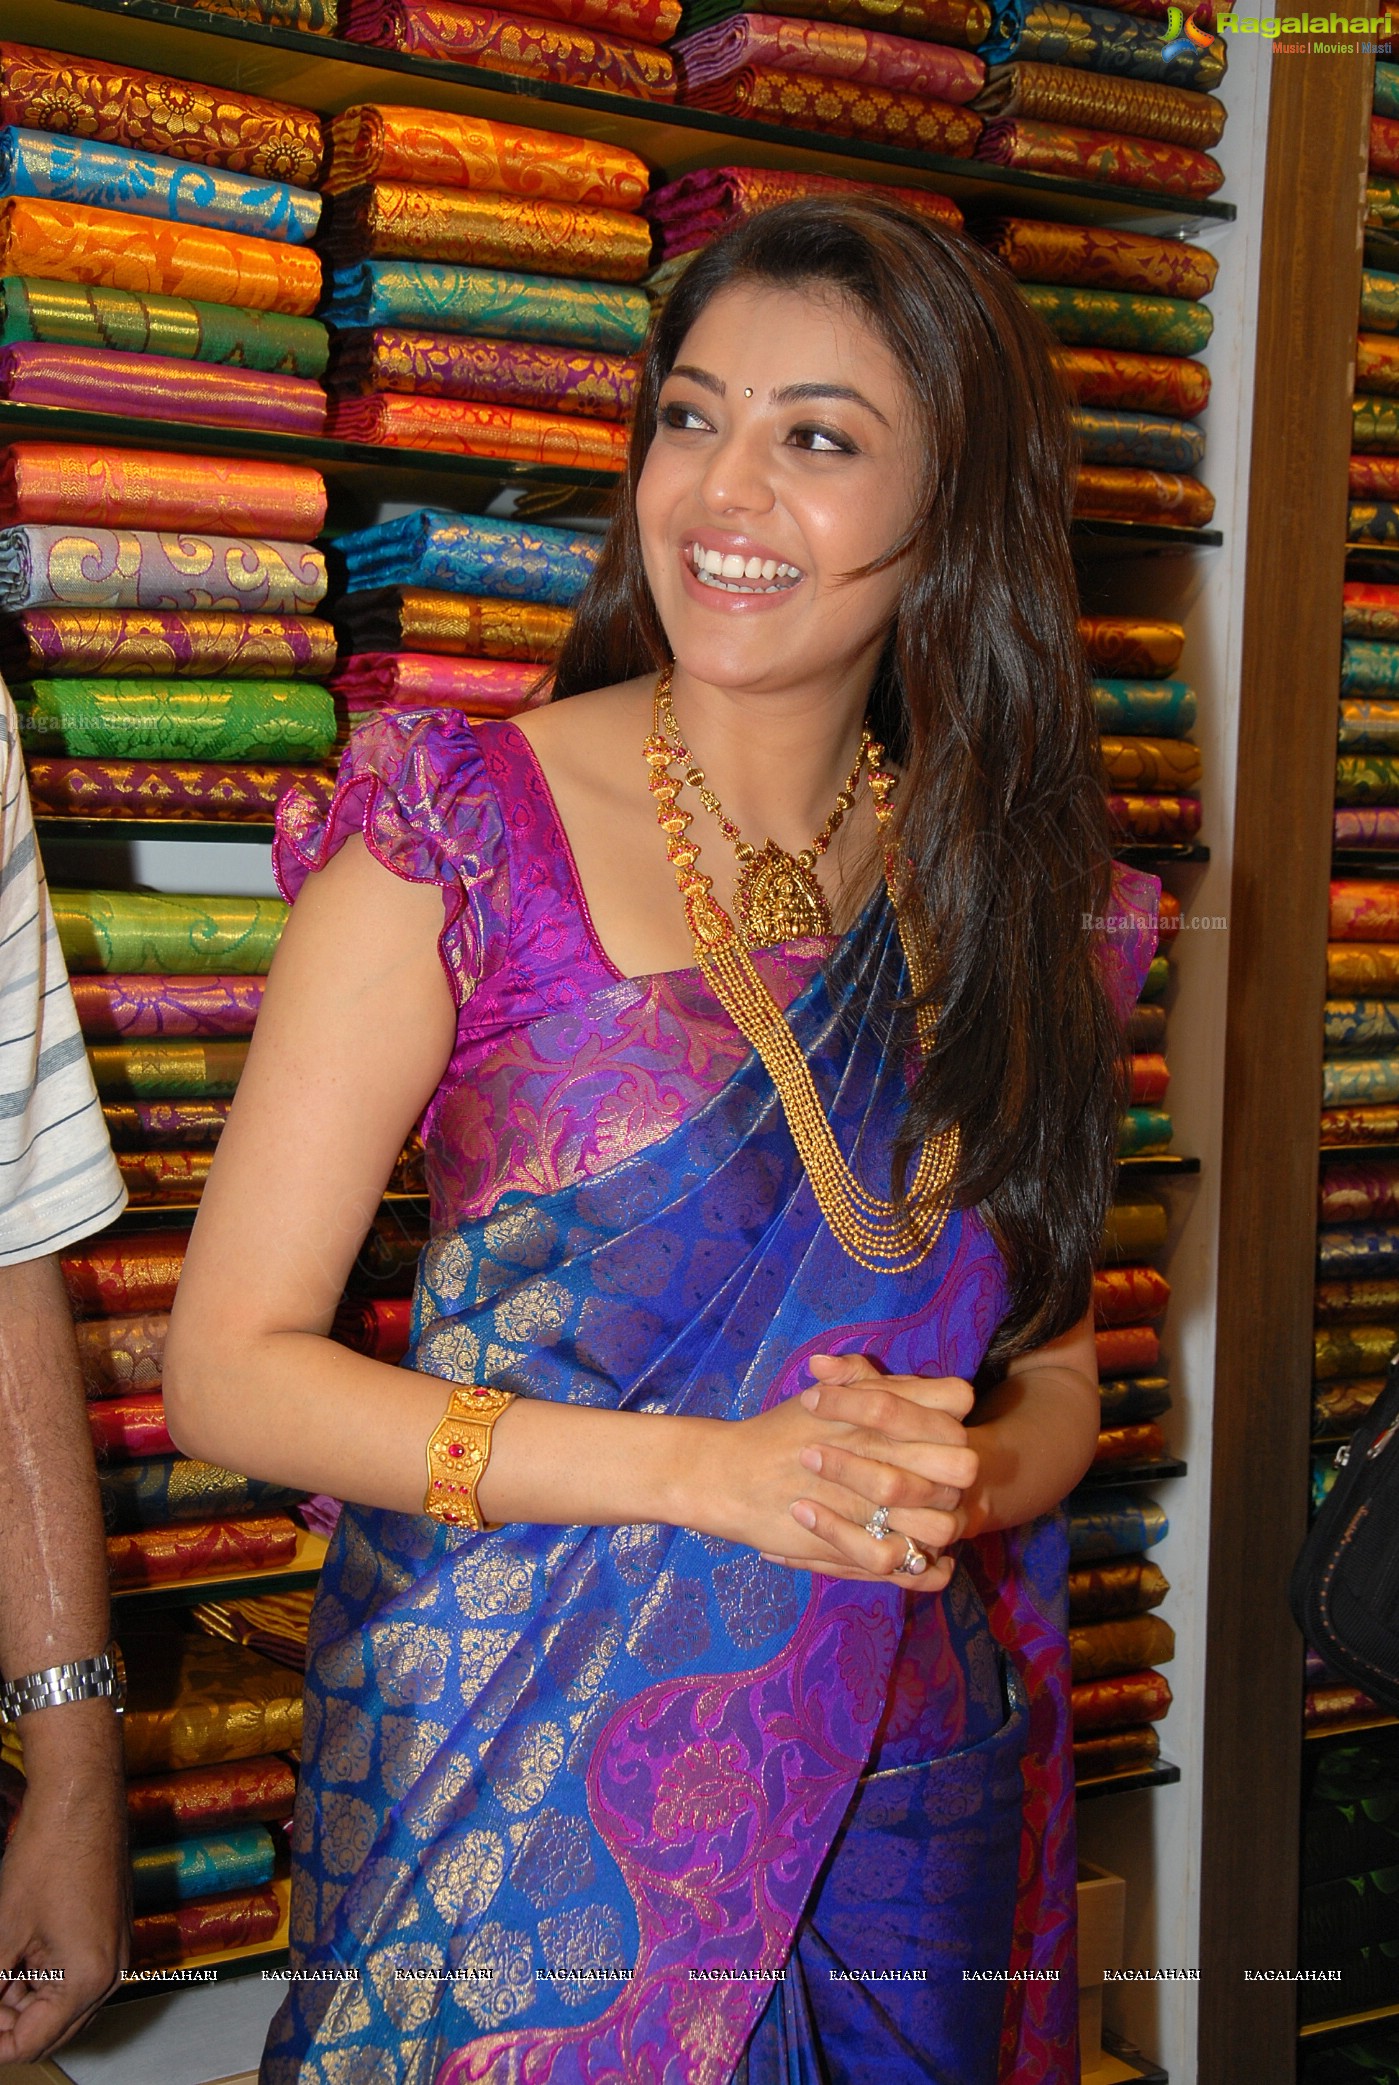 Kajal Aggarwal in Purple Saree Chennai Shopping Mall, Hyderabad, Gallery, Images